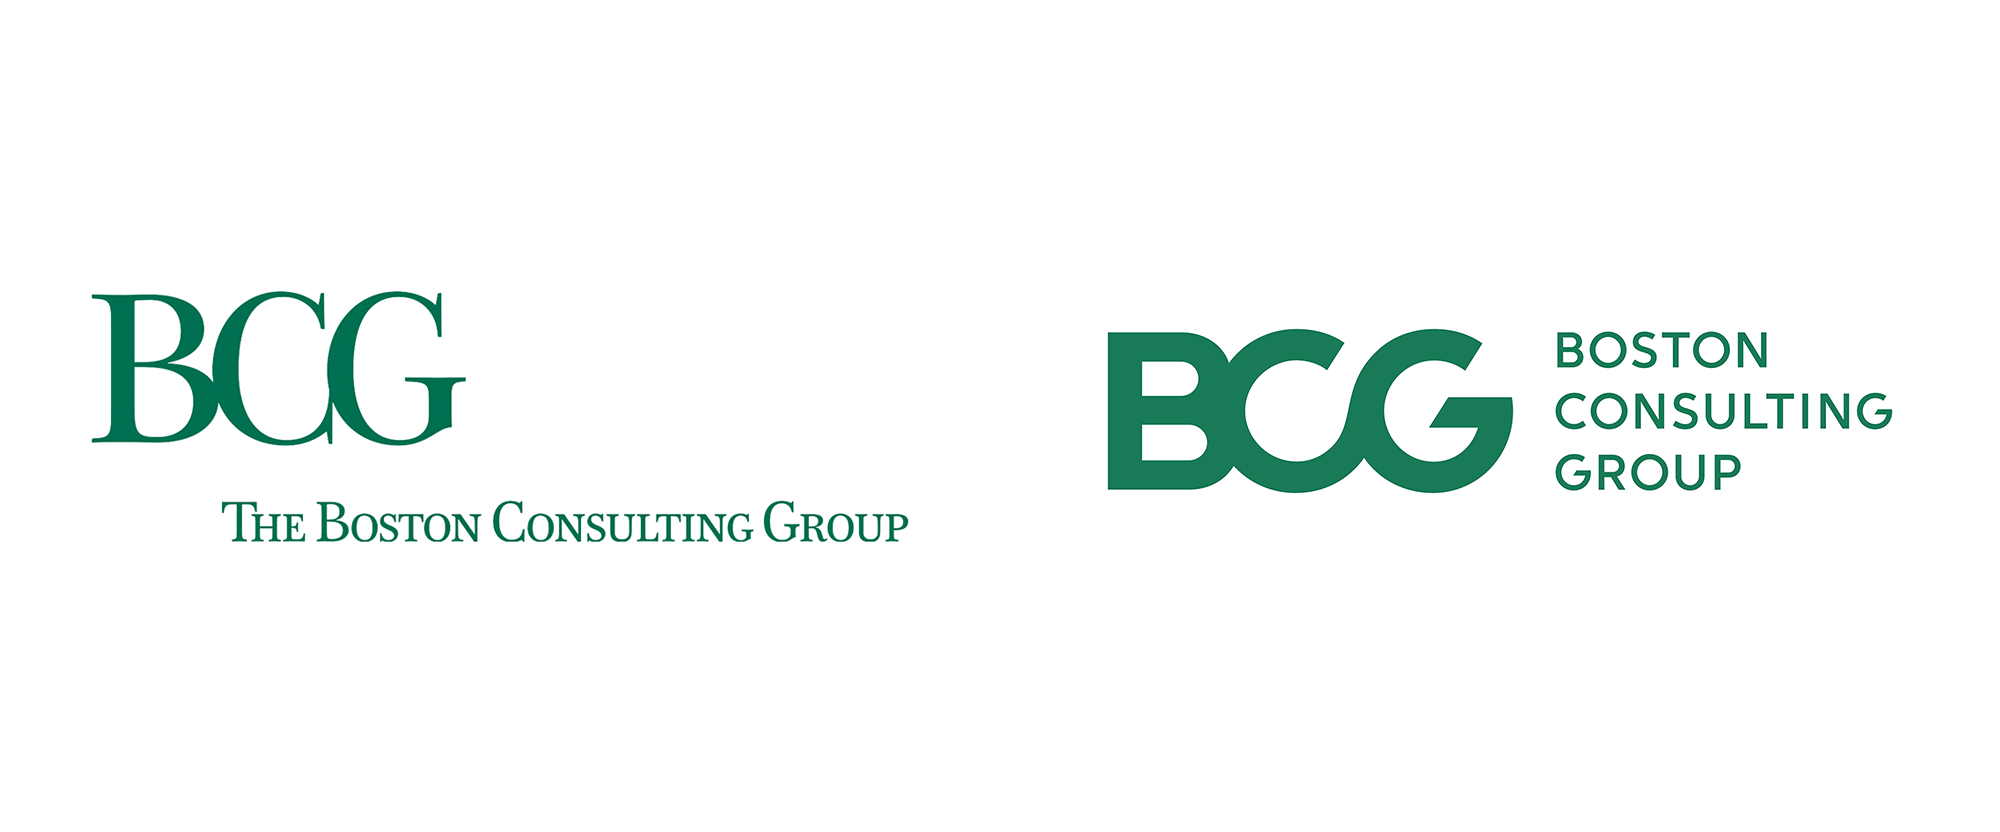 Brand New: New Logo and Identity for Boston Consulting Group by Carbone